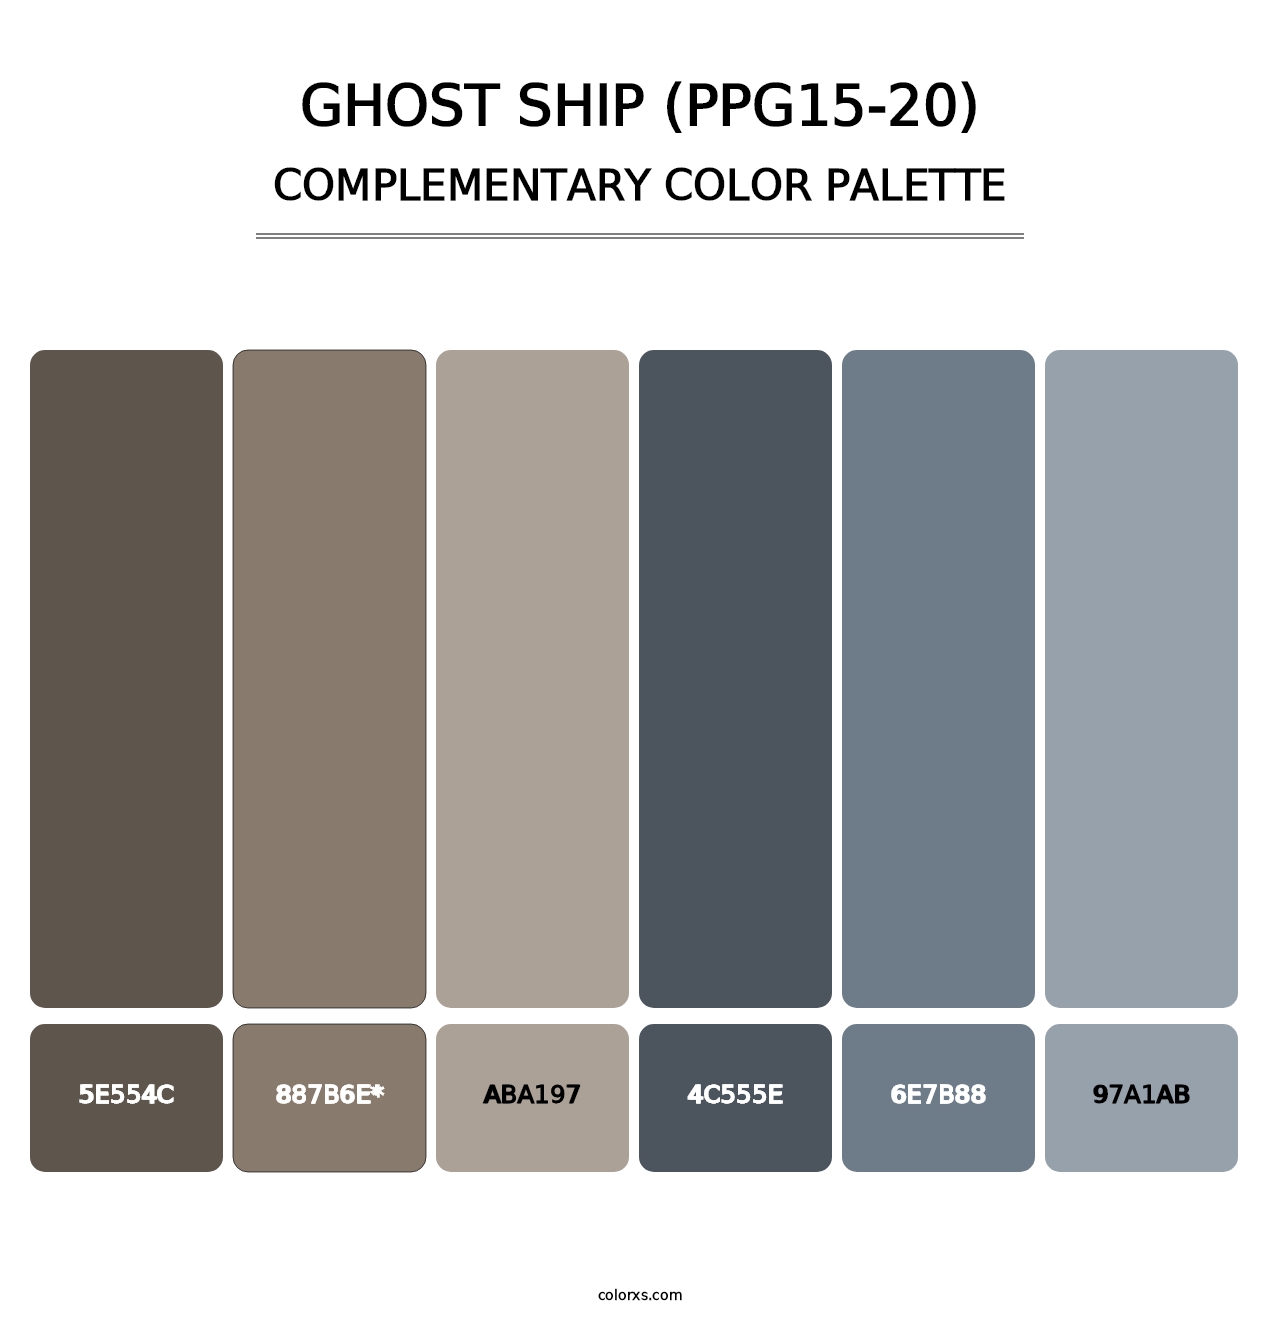 Ghost Ship (PPG15-20) - Complementary Color Palette